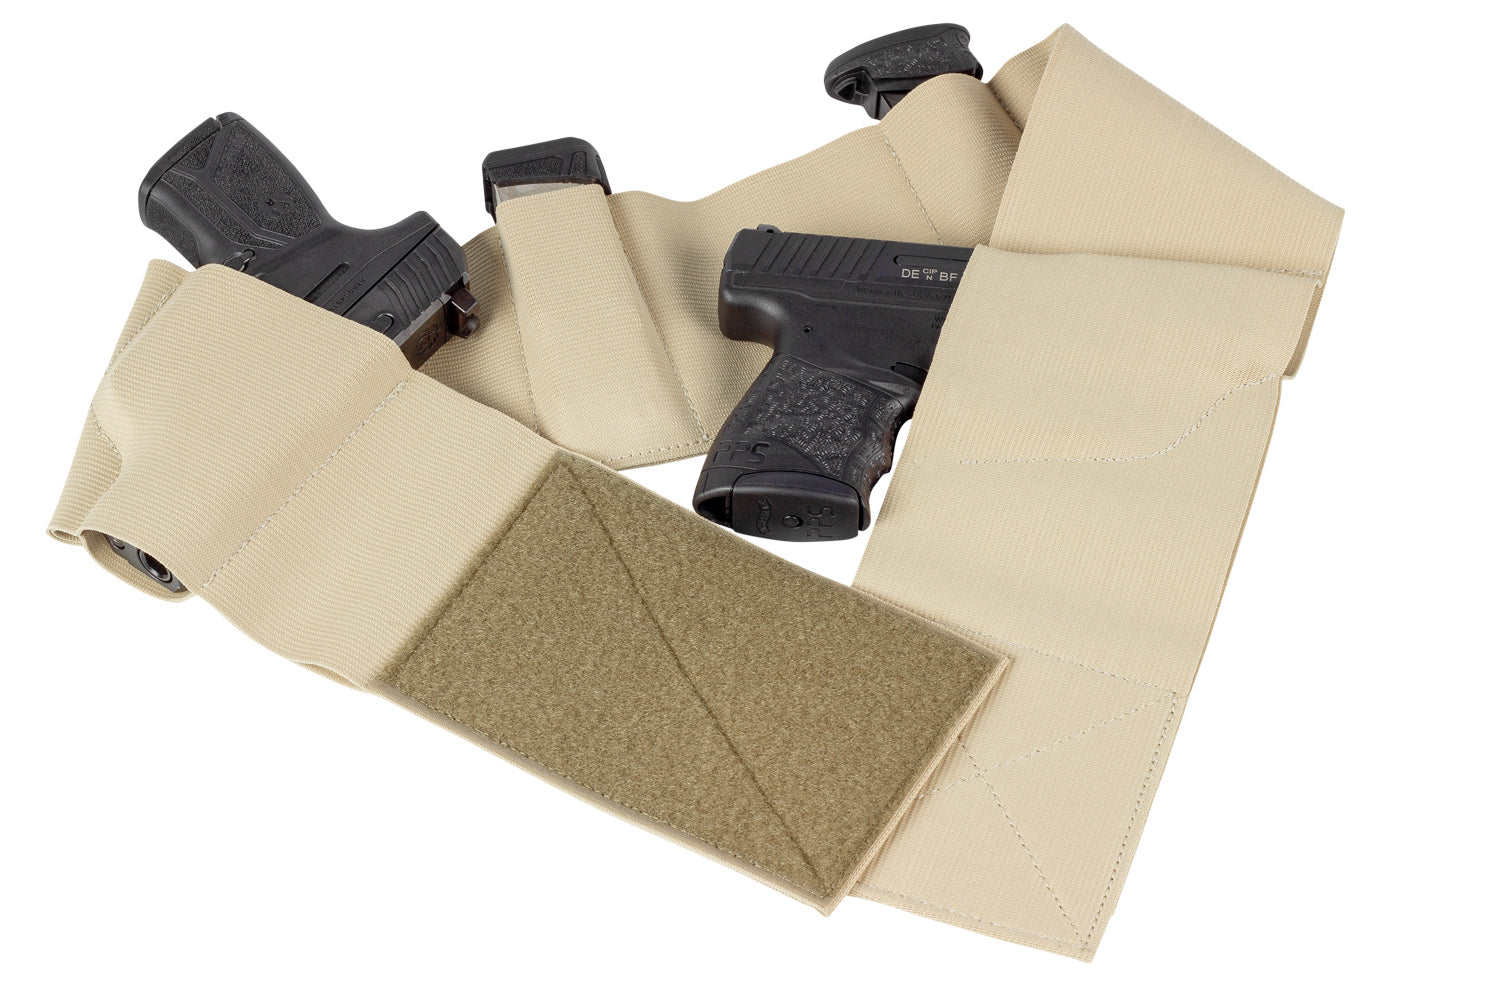 Concealed Carry Belly Band -  Canada